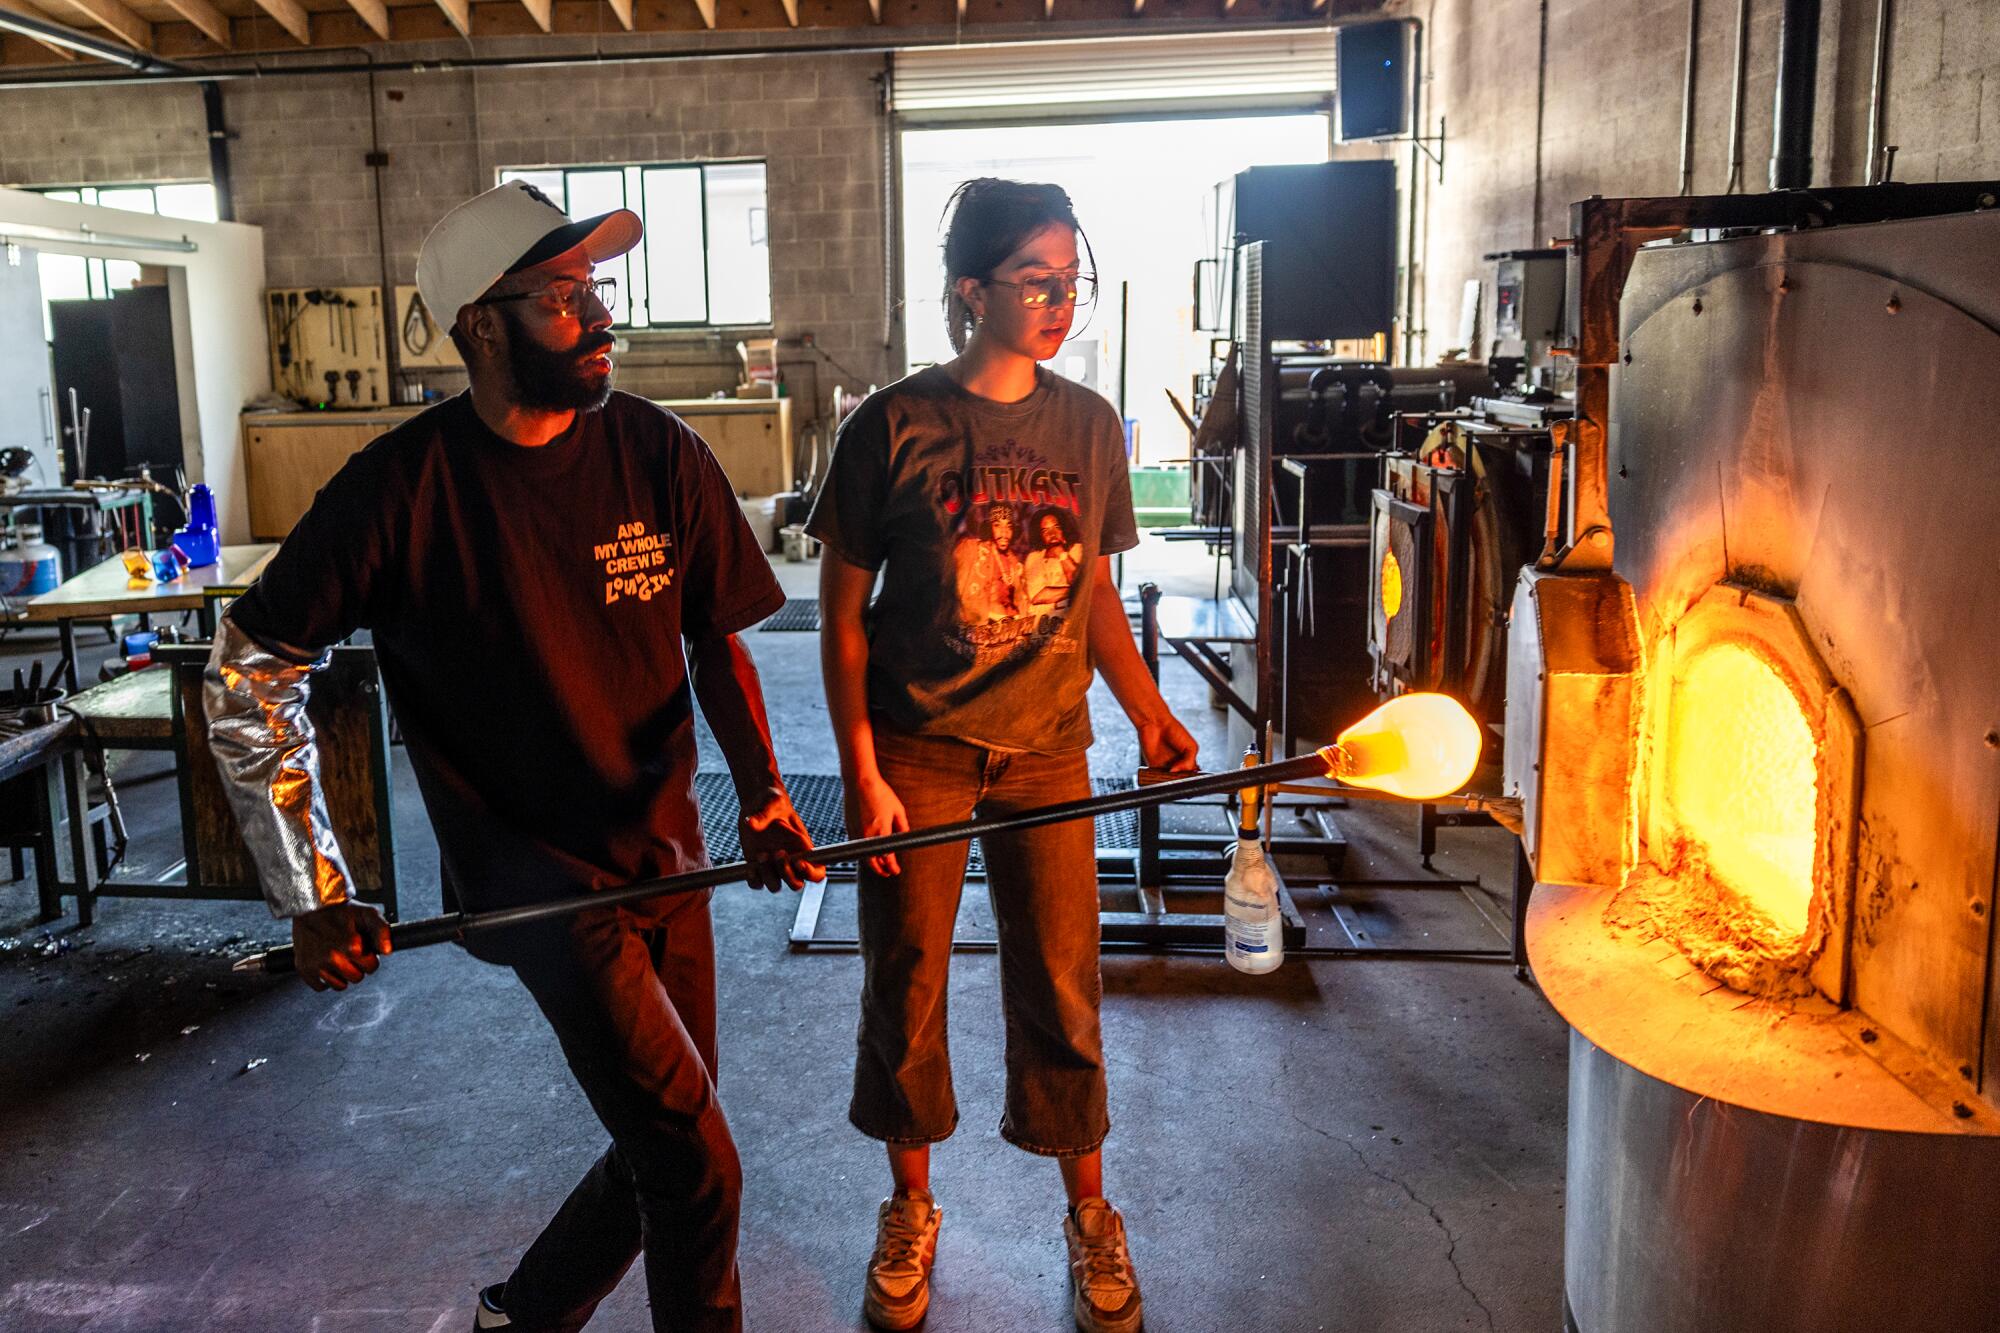 Assistant glassblower Sara Roller looks on as glassblower Cedric Mitchell removes glass from a kiln.